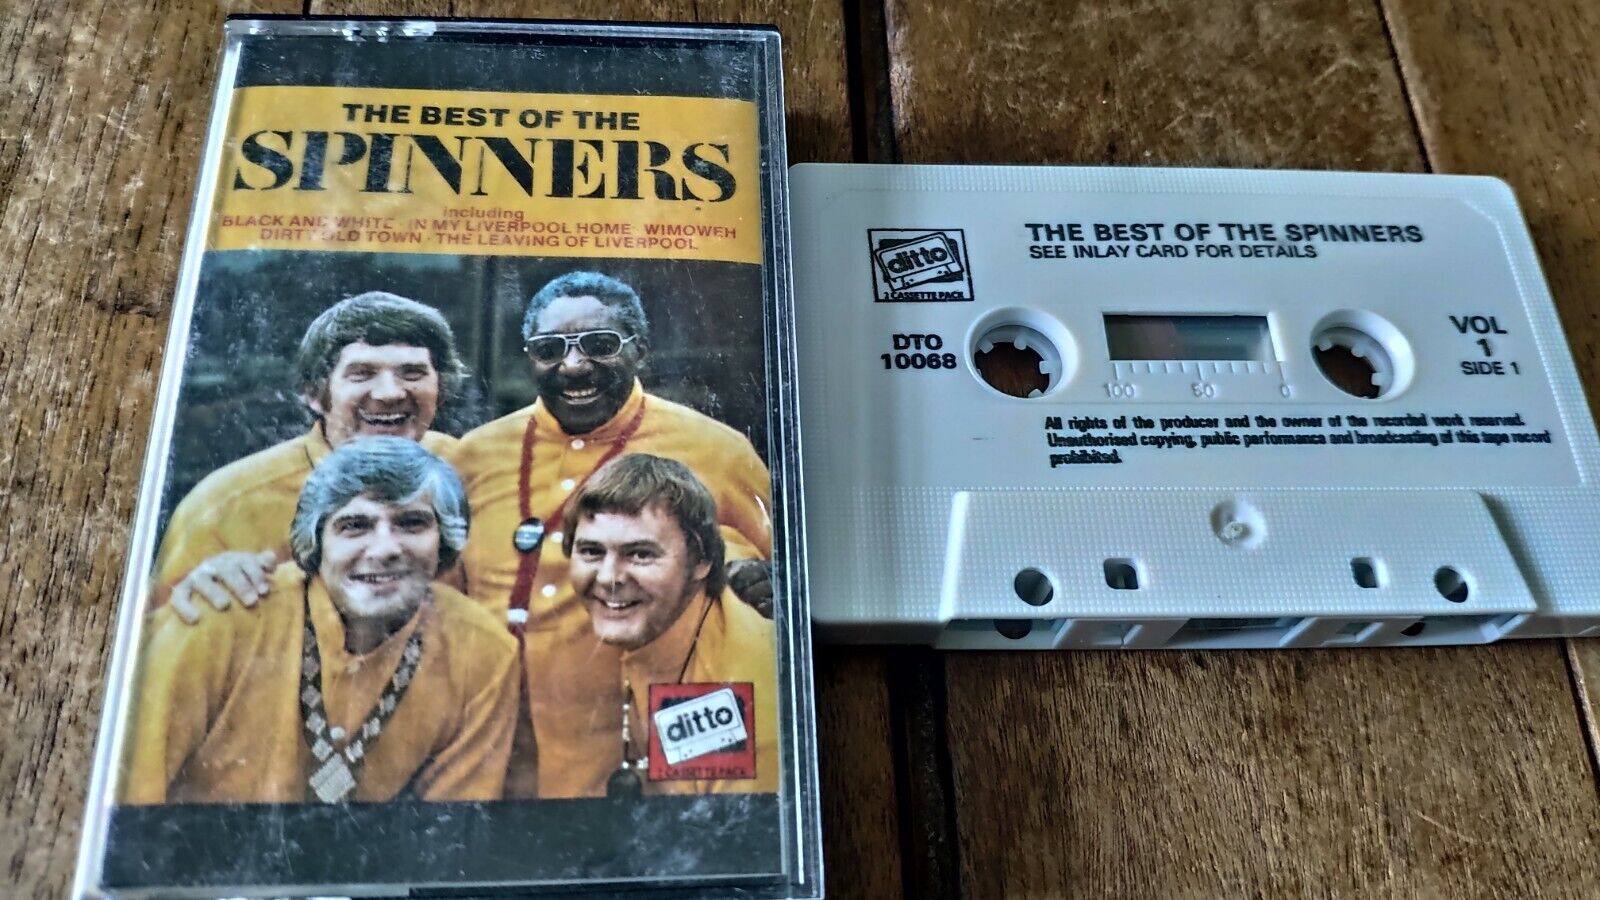 THE SPINNERS - THE BEST OF THE SPINNERS VOL 1 -  CASSETTE TAPE ALBUM